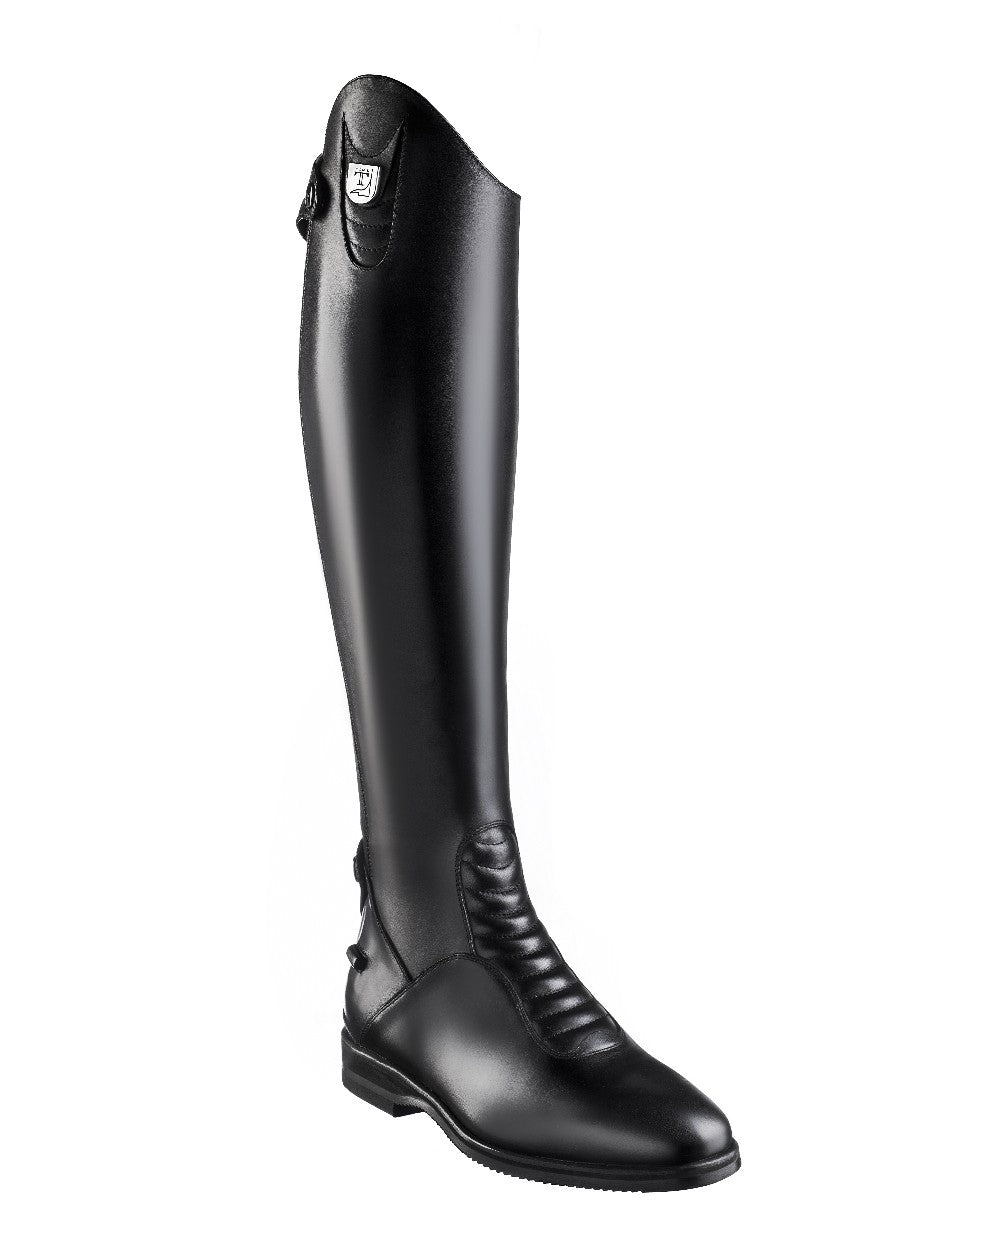 Tucci riding boots Harley with E-tex Black size 43